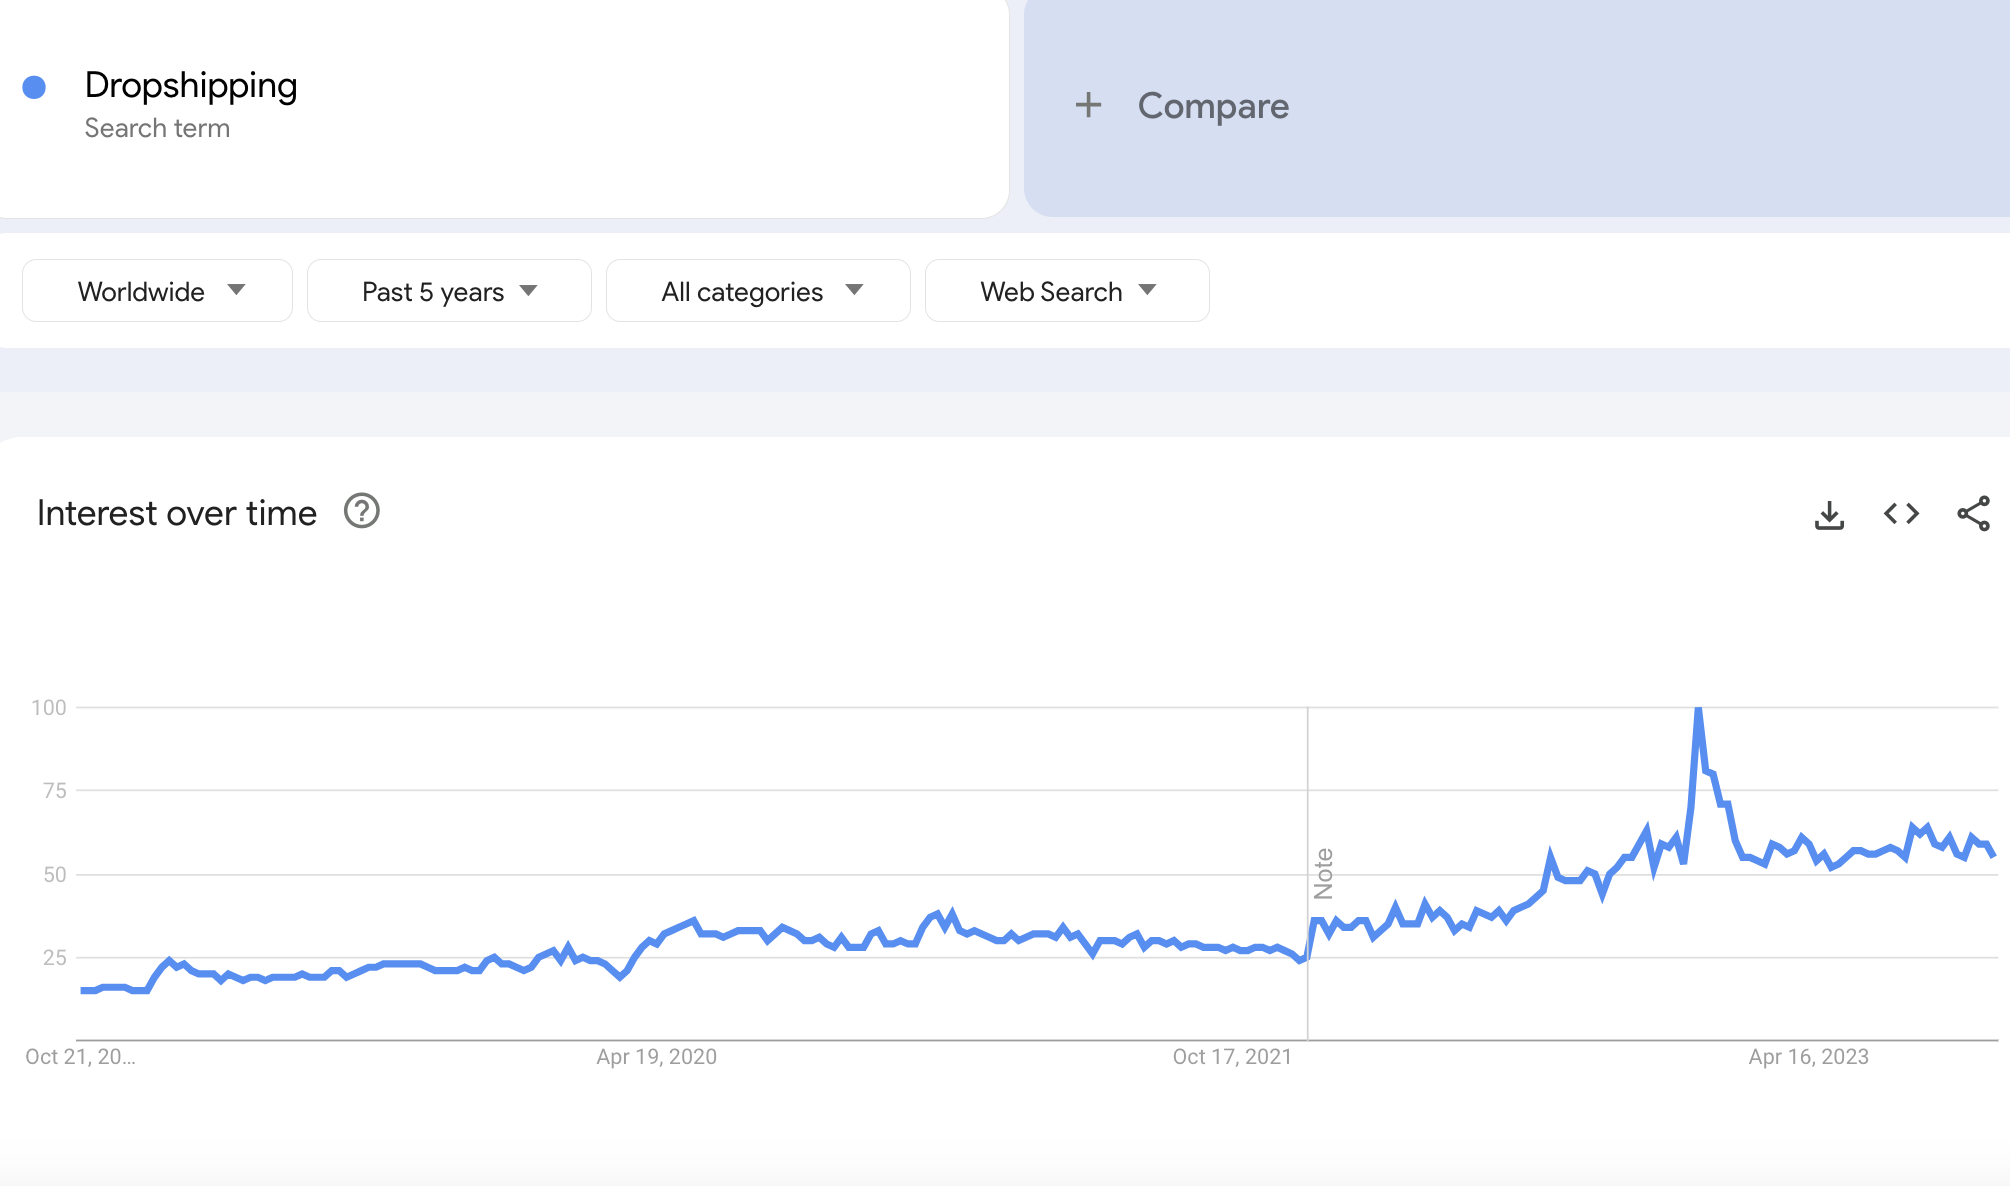 Dropshipping on Google Trends